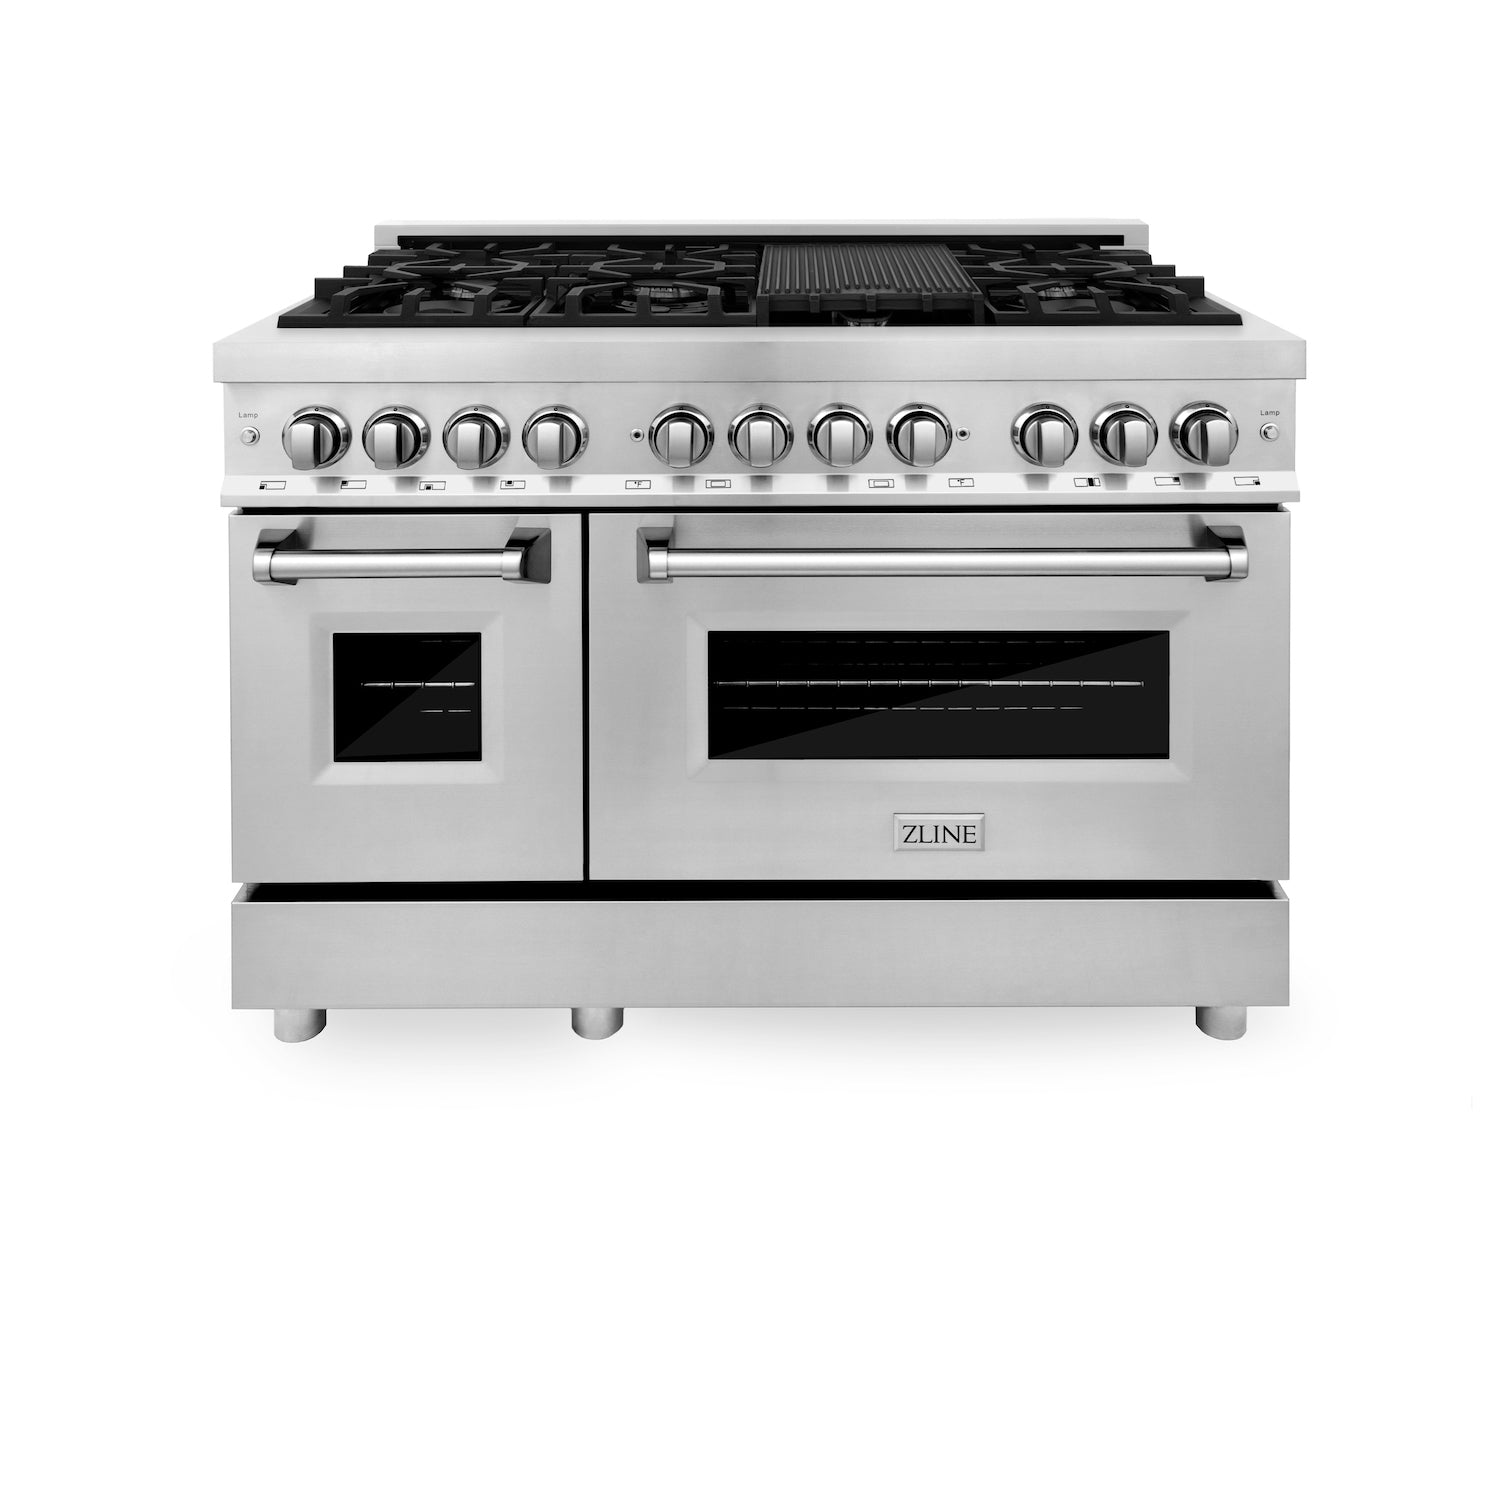 ZLINE 48 in. Professional Dual Fuel Range in Stainless Steel (RA48) front.